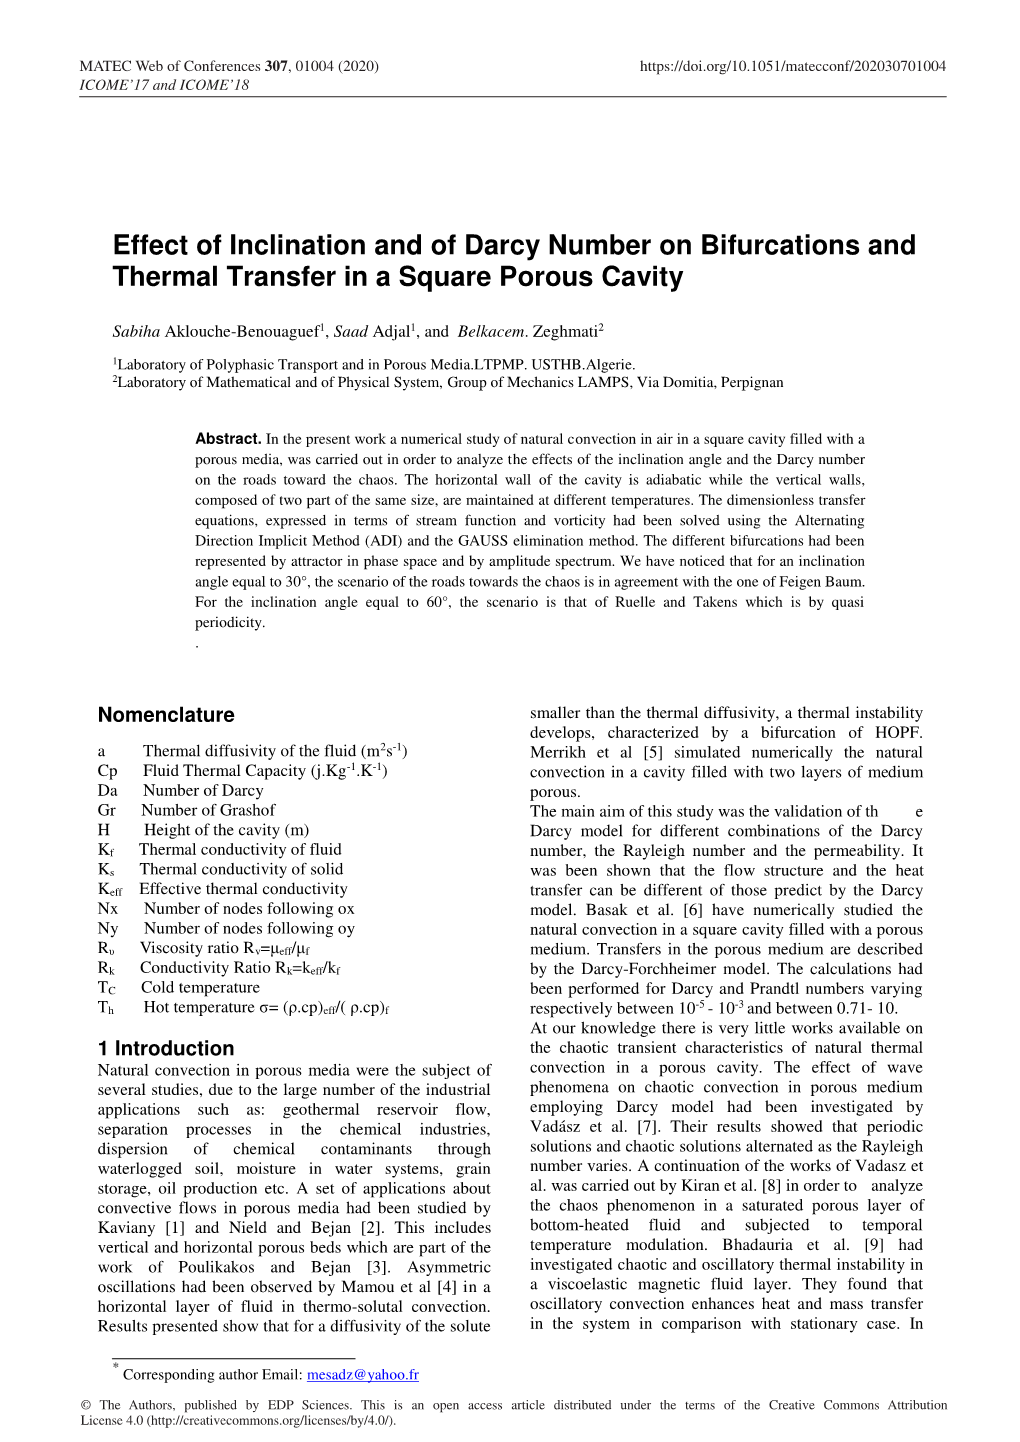 Effect of Inclination and of Darcy Number on Bifurcations and Thermal Transfer in a Square Porous Cavity